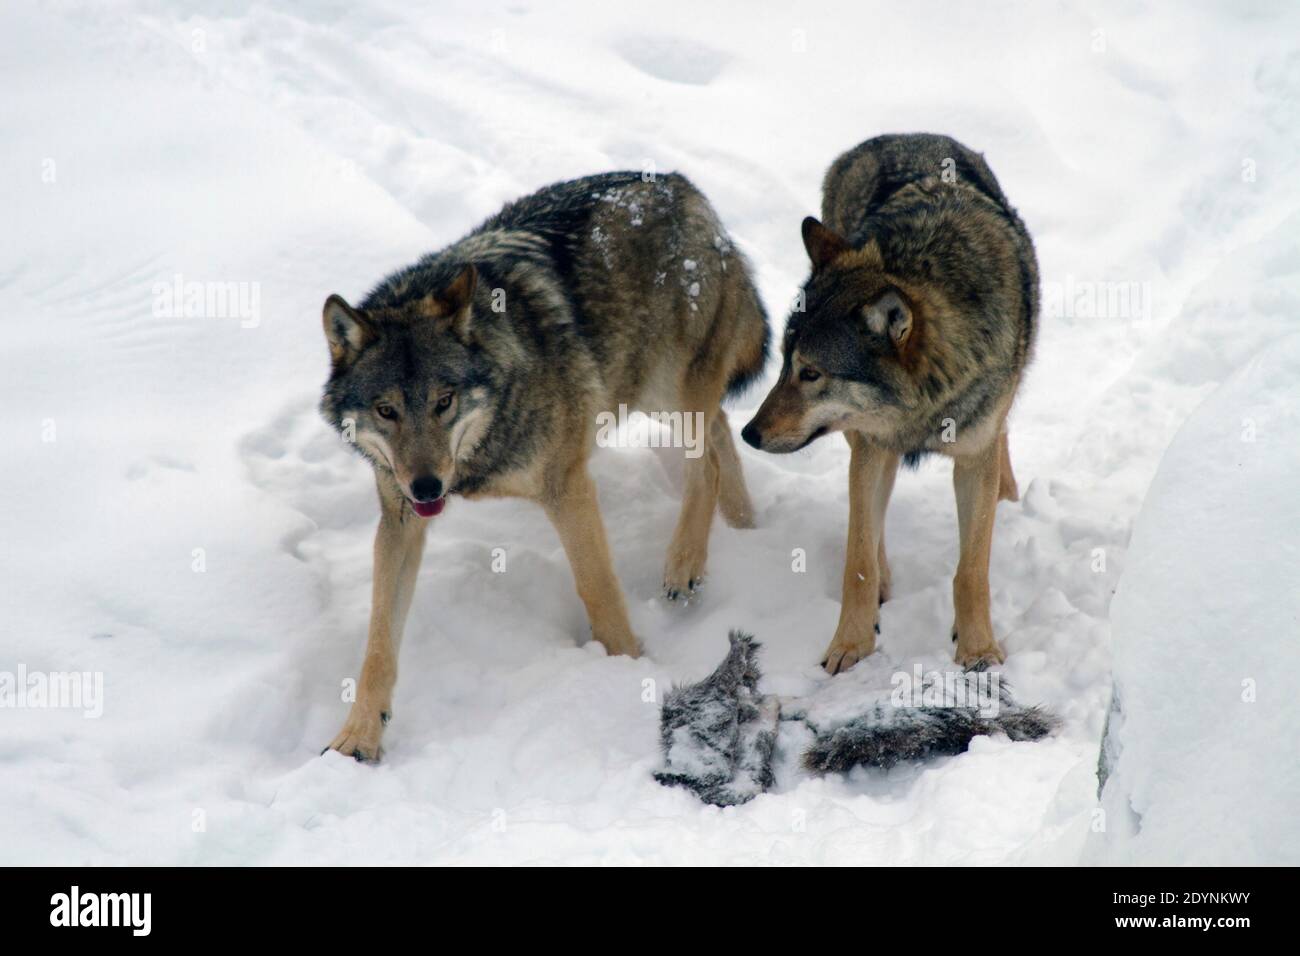 A pair of European gray wolves (Canis lupus), in snow, Finland, Lapland Stock Photo